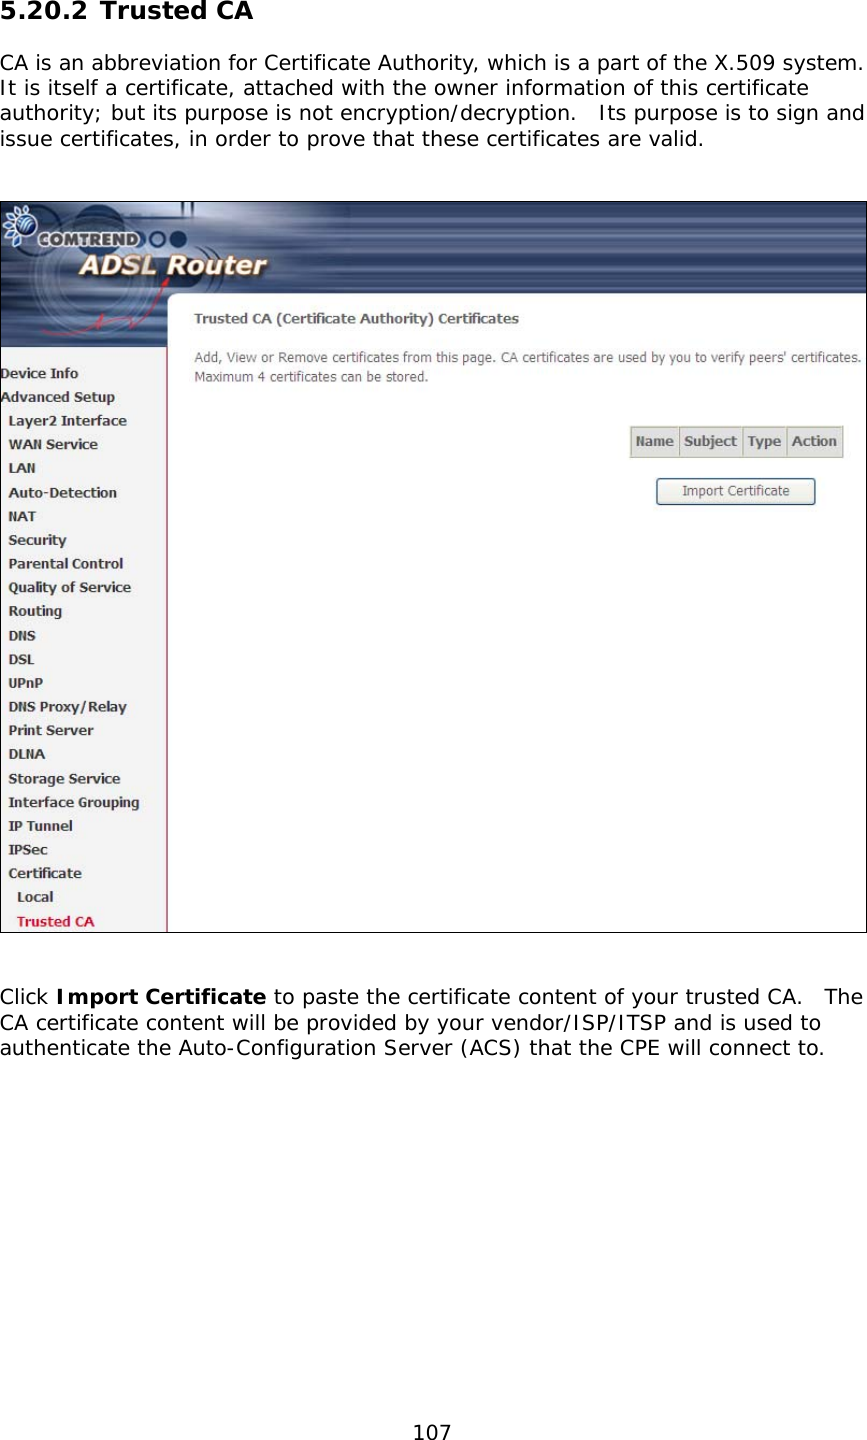  107 5.20.2 Trusted CA CA is an abbreviation for Certificate Authority, which is a part of the X.509 system.  It is itself a certificate, attached with the owner information of this certificate authority; but its purpose is not encryption/decryption.  Its purpose is to sign and issue certificates, in order to prove that these certificates are valid.      Click Import Certificate to paste the certificate content of your trusted CA.  The CA certificate content will be provided by your vendor/ISP/ITSP and is used to authenticate the Auto-Configuration Server (ACS) that the CPE will connect to.  